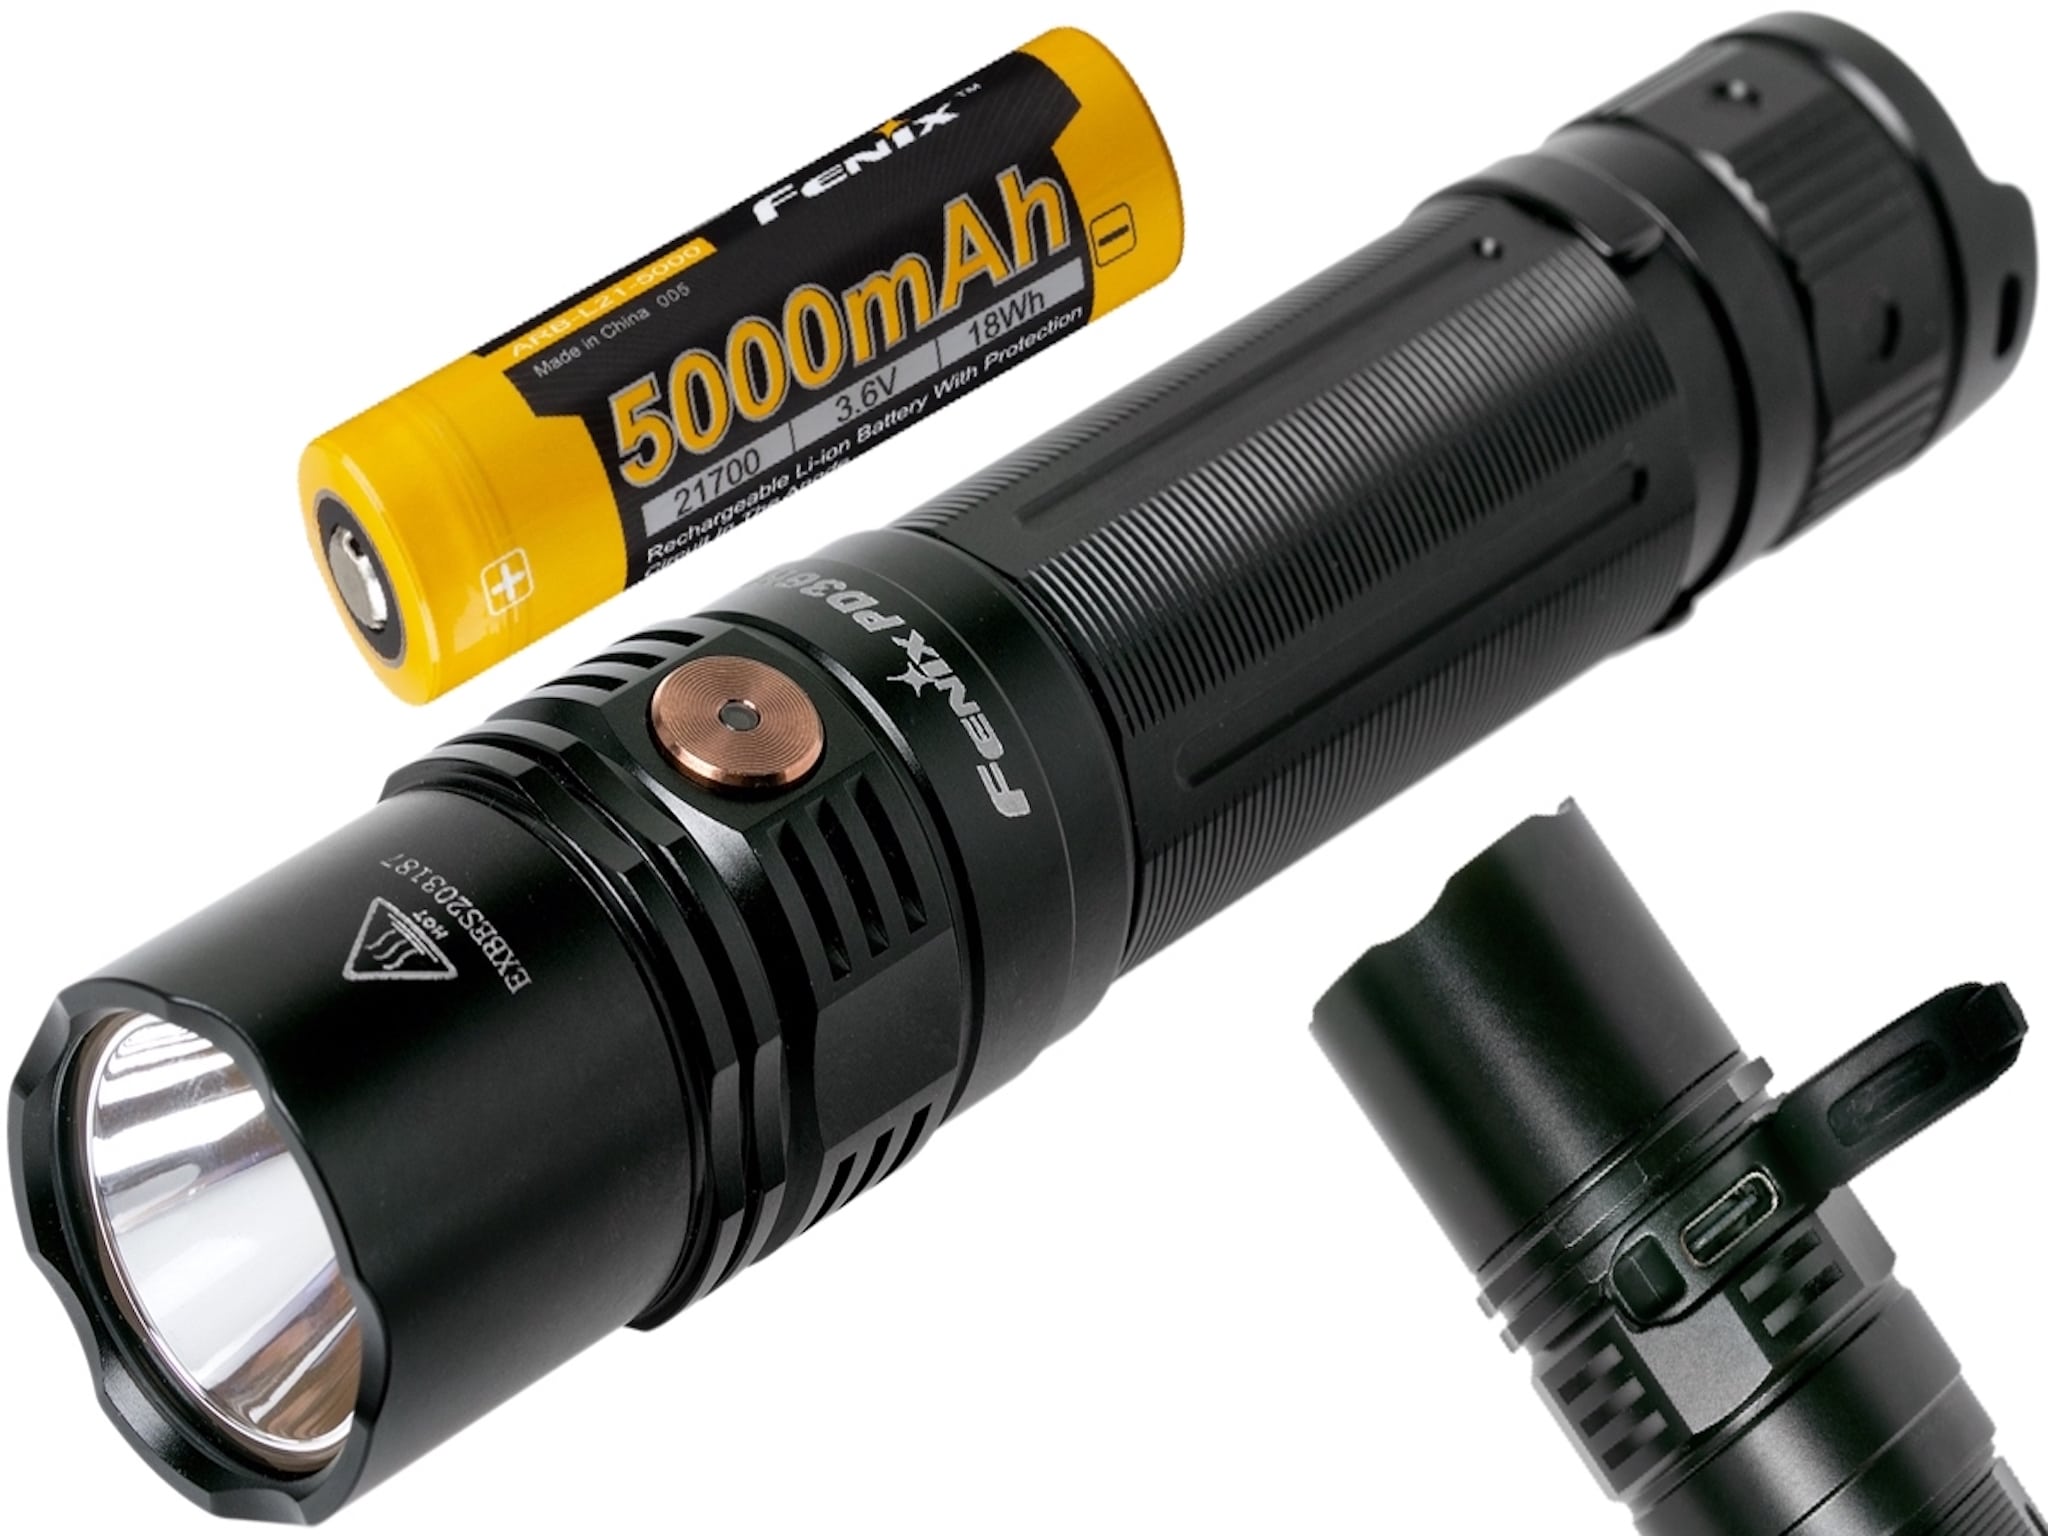 Fenix PD36R LED Flashlight, USB C Type Rechargeable Long Duration LED Torch, Extremely Powerful Tactical Flashlight in India, PD36R Review